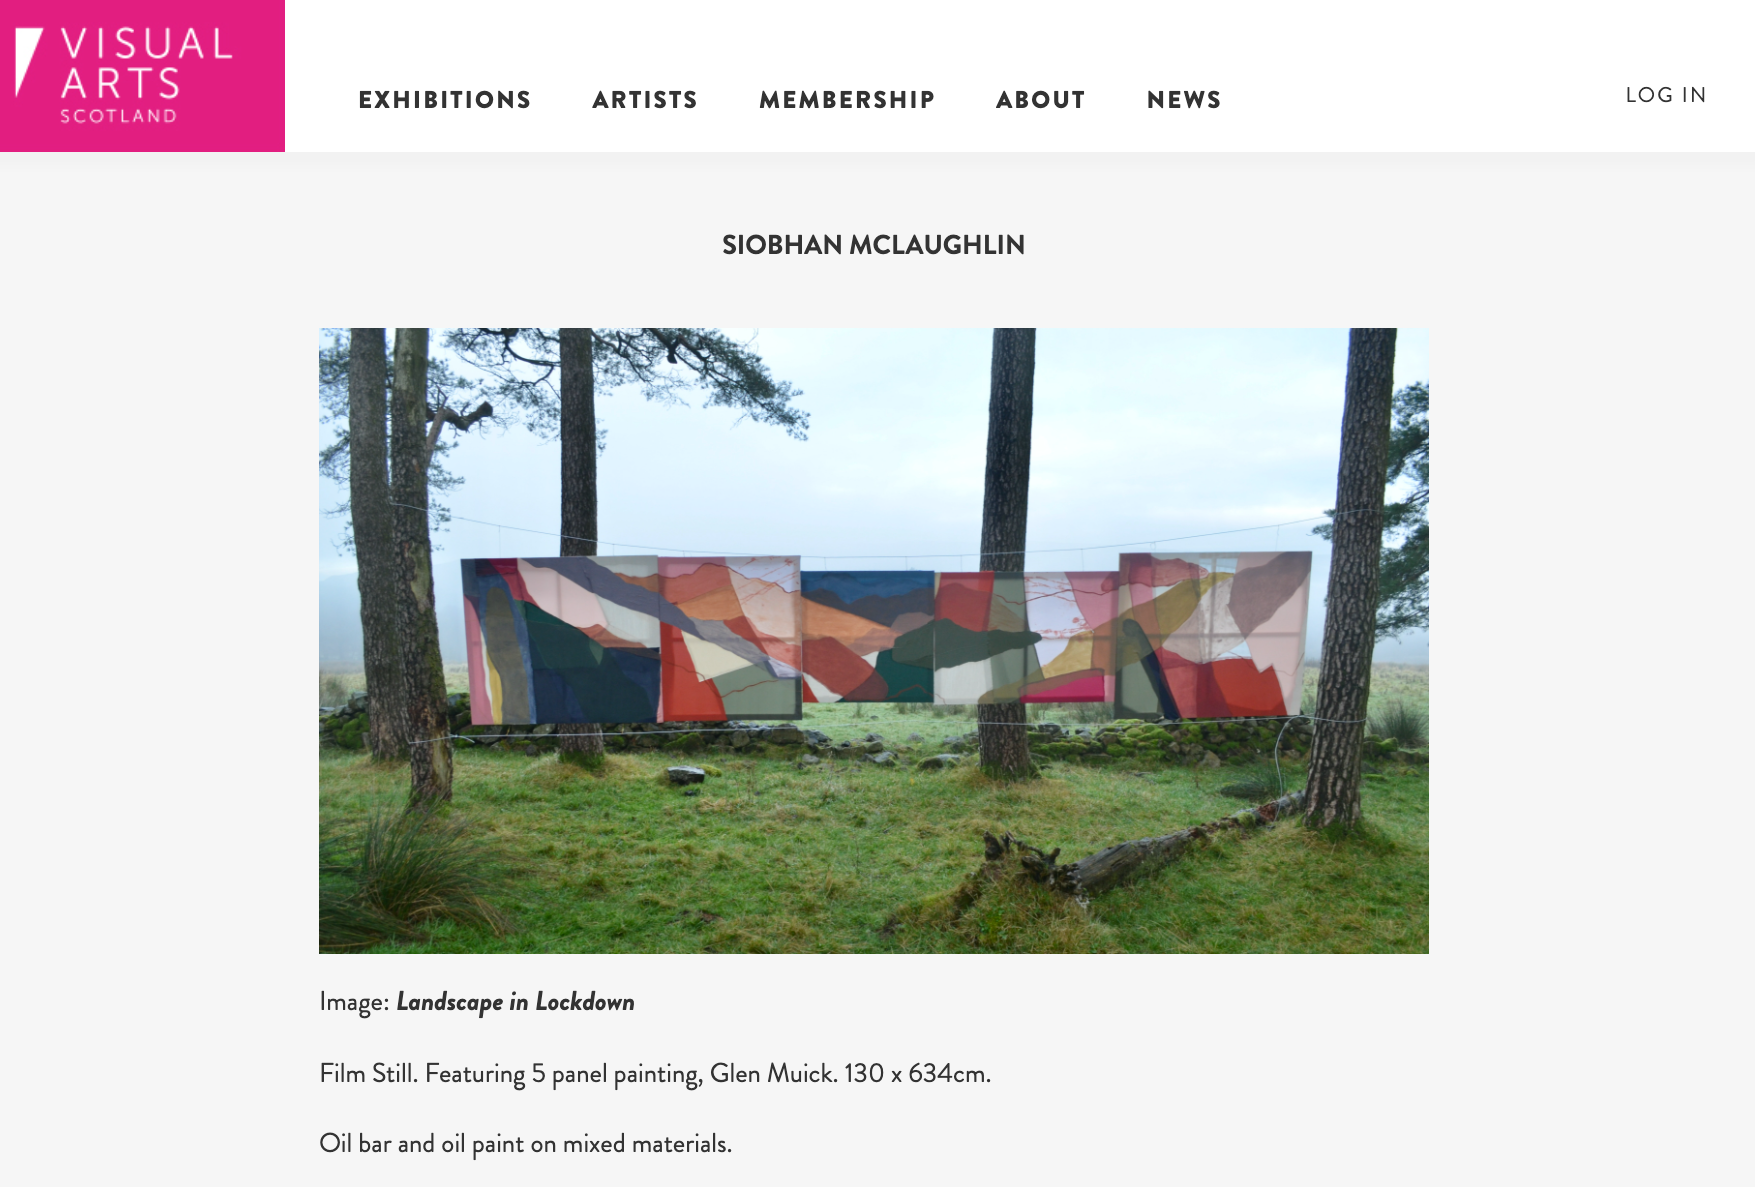 Website page with image of large painting artwork in the forest